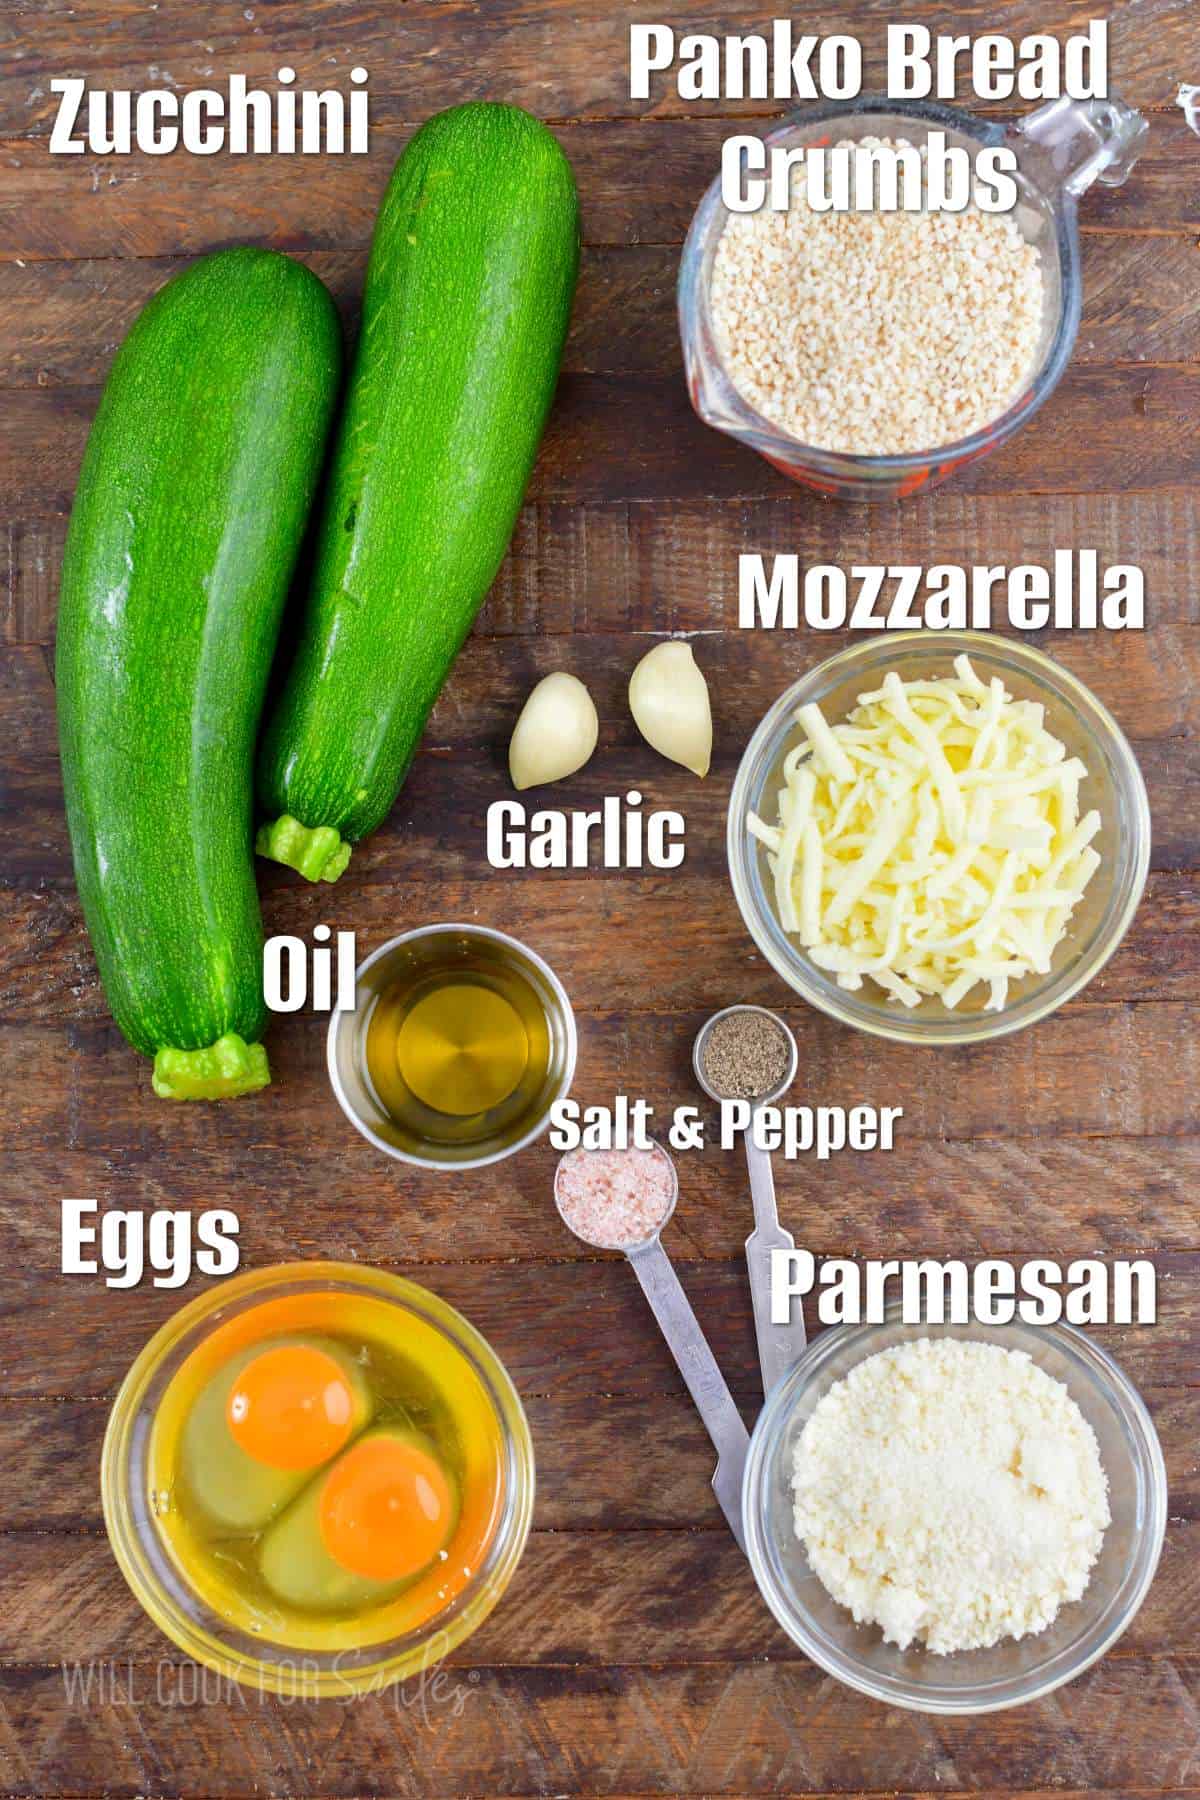 labeled ingredients for making zucchini fritters on the wooden board.